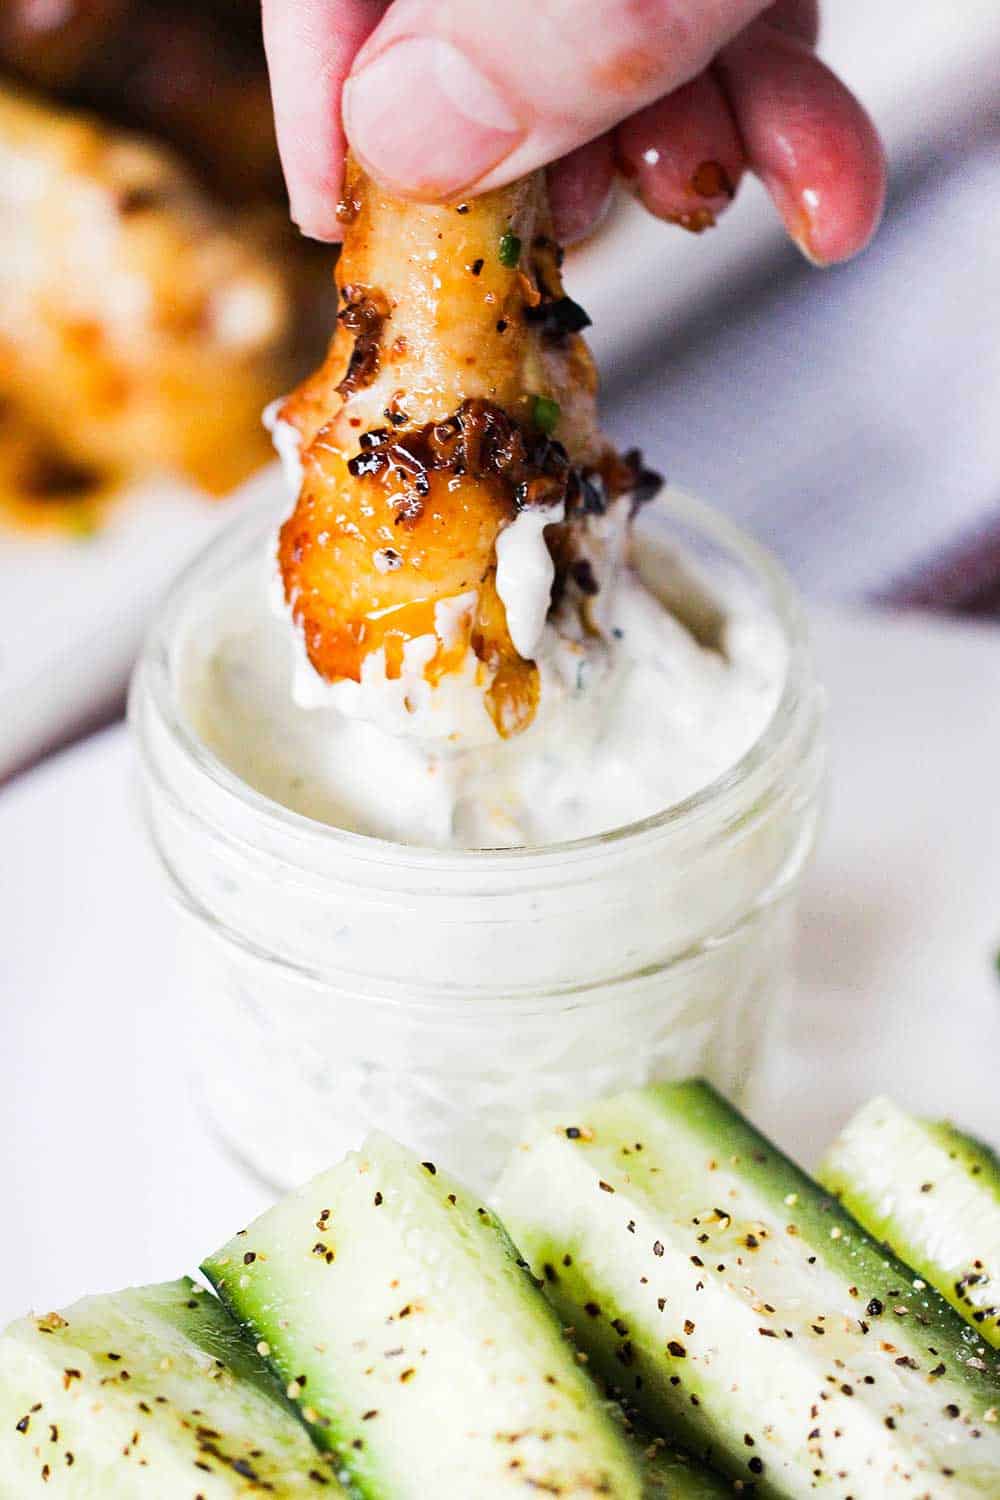 A hand plunging a baked hot wing into a jar of blue cheese dressing next to a plate of sliced cucumbers. 